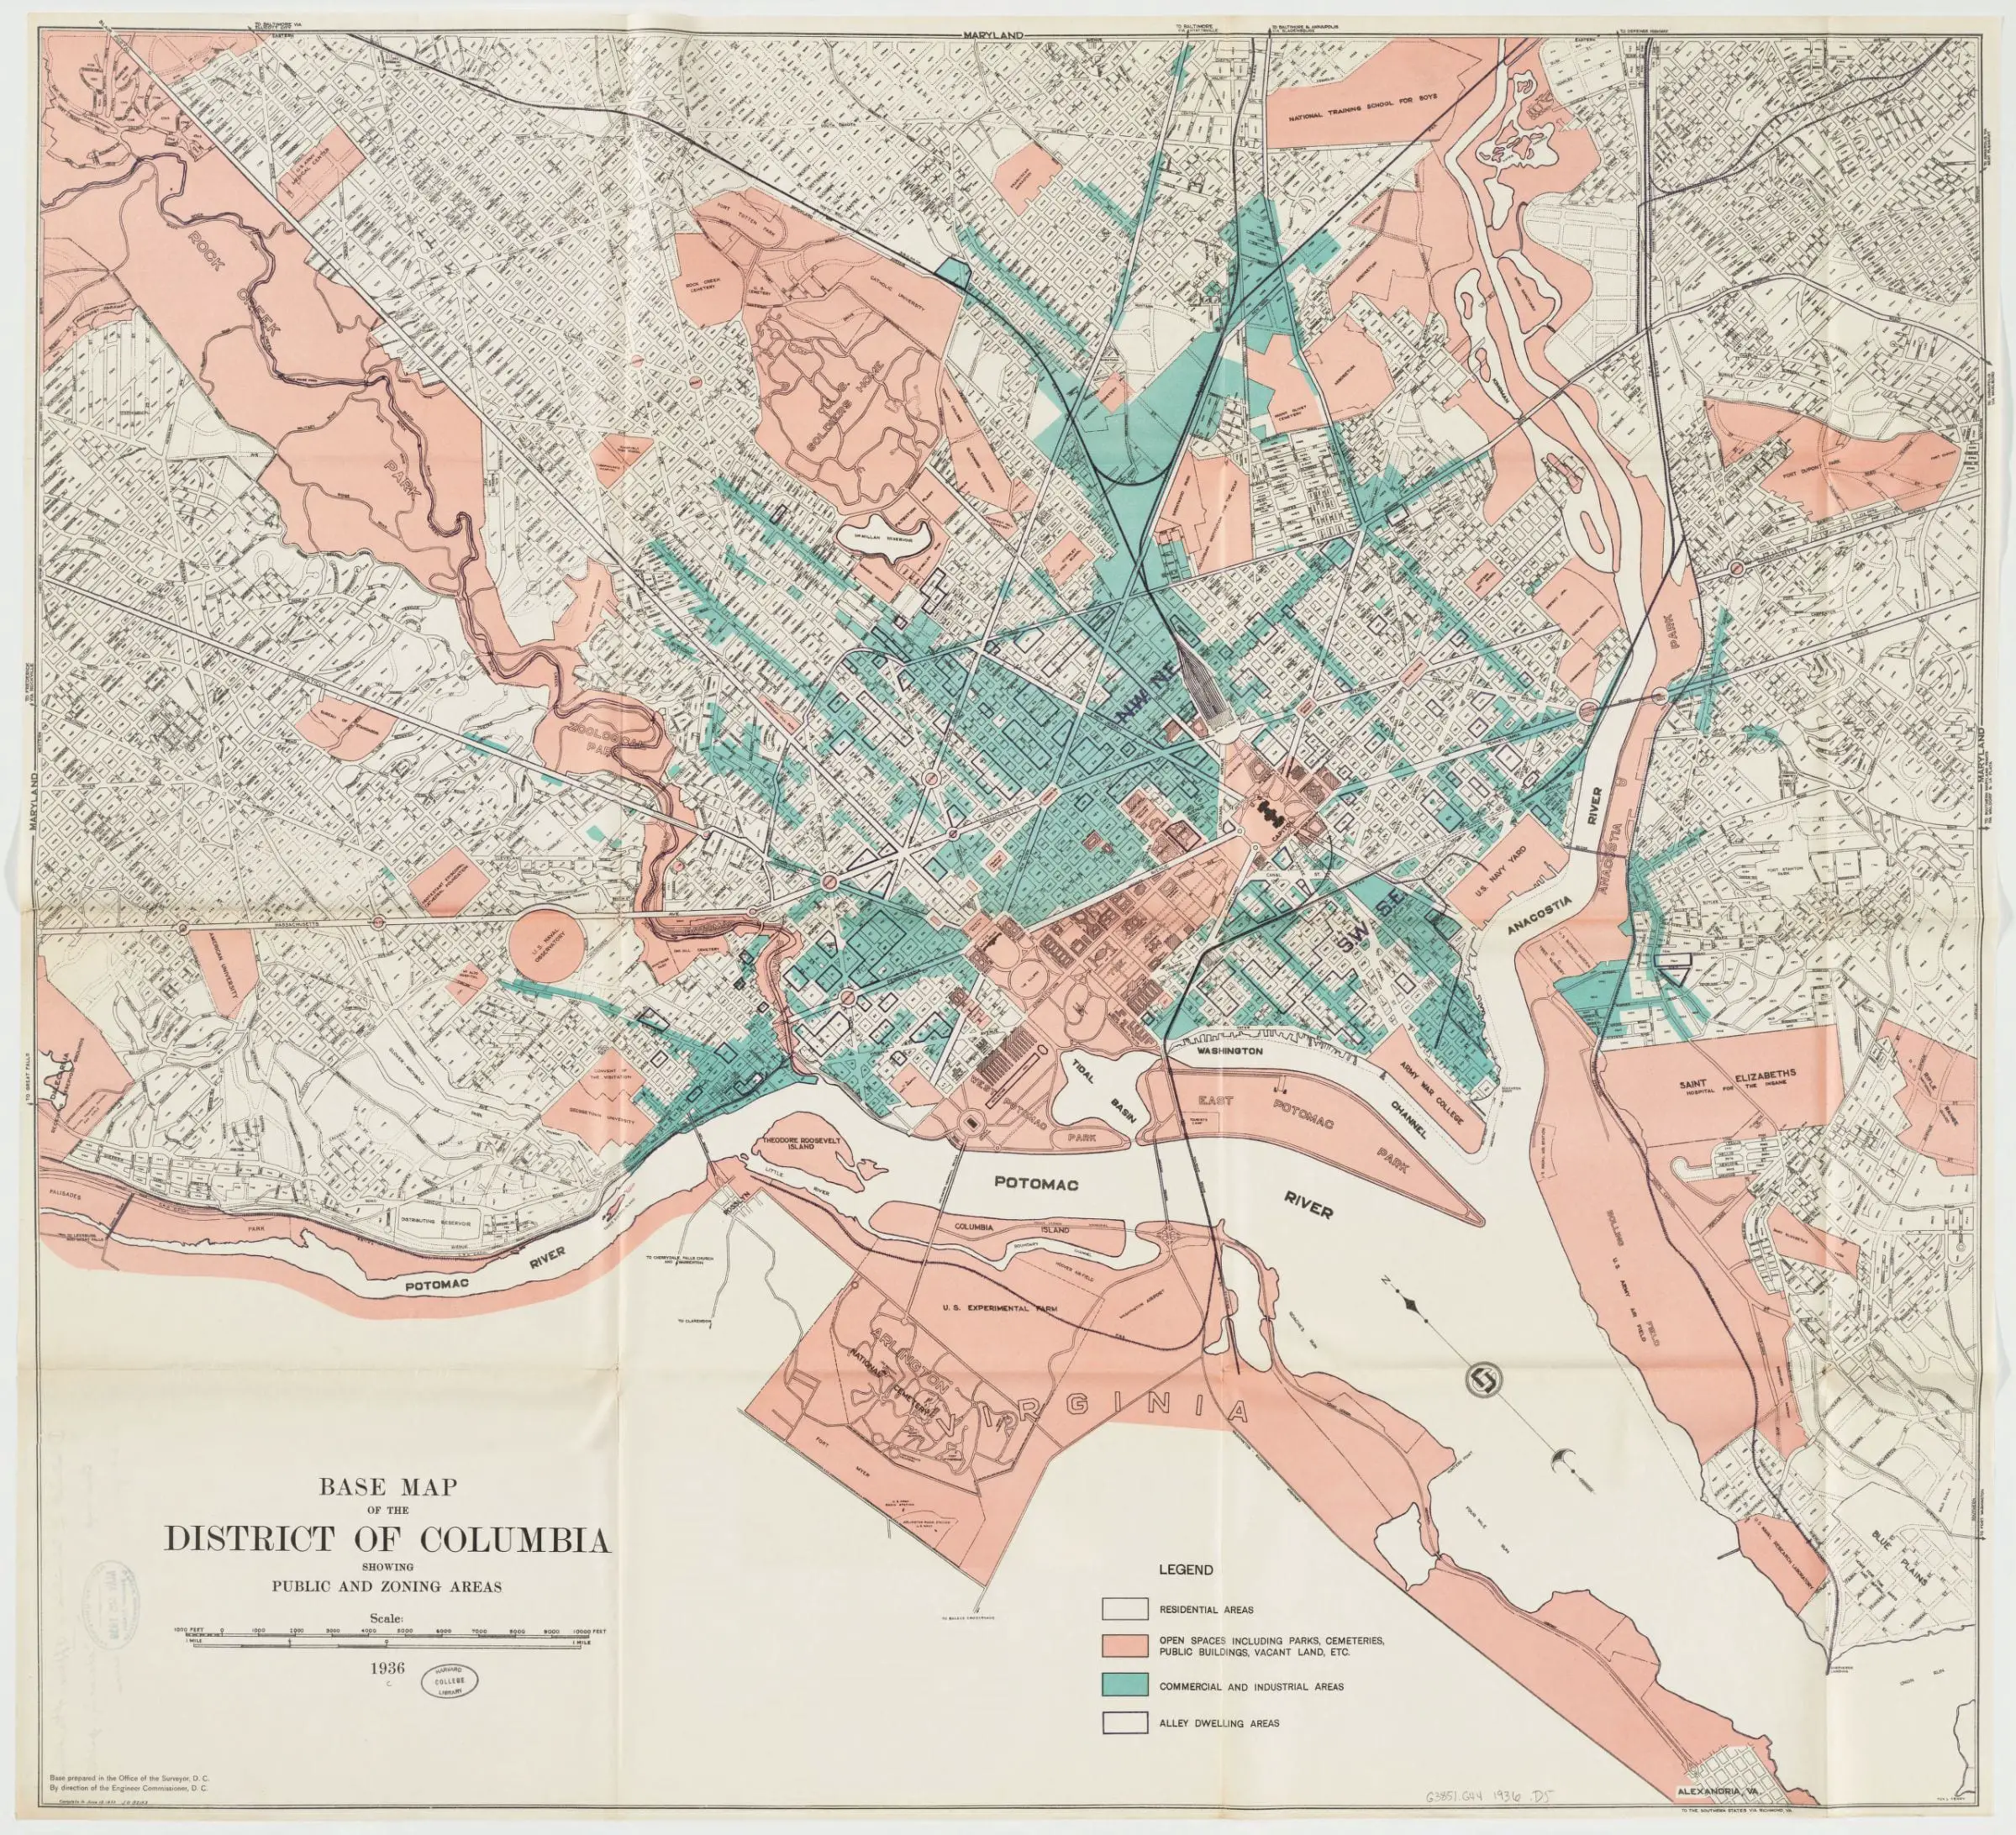 Base map of the District of Columbia showing public and zoning areas / base prepared in the Office of the Surveyor, D.C., by direction of the Engineer Commissioner, D.C.